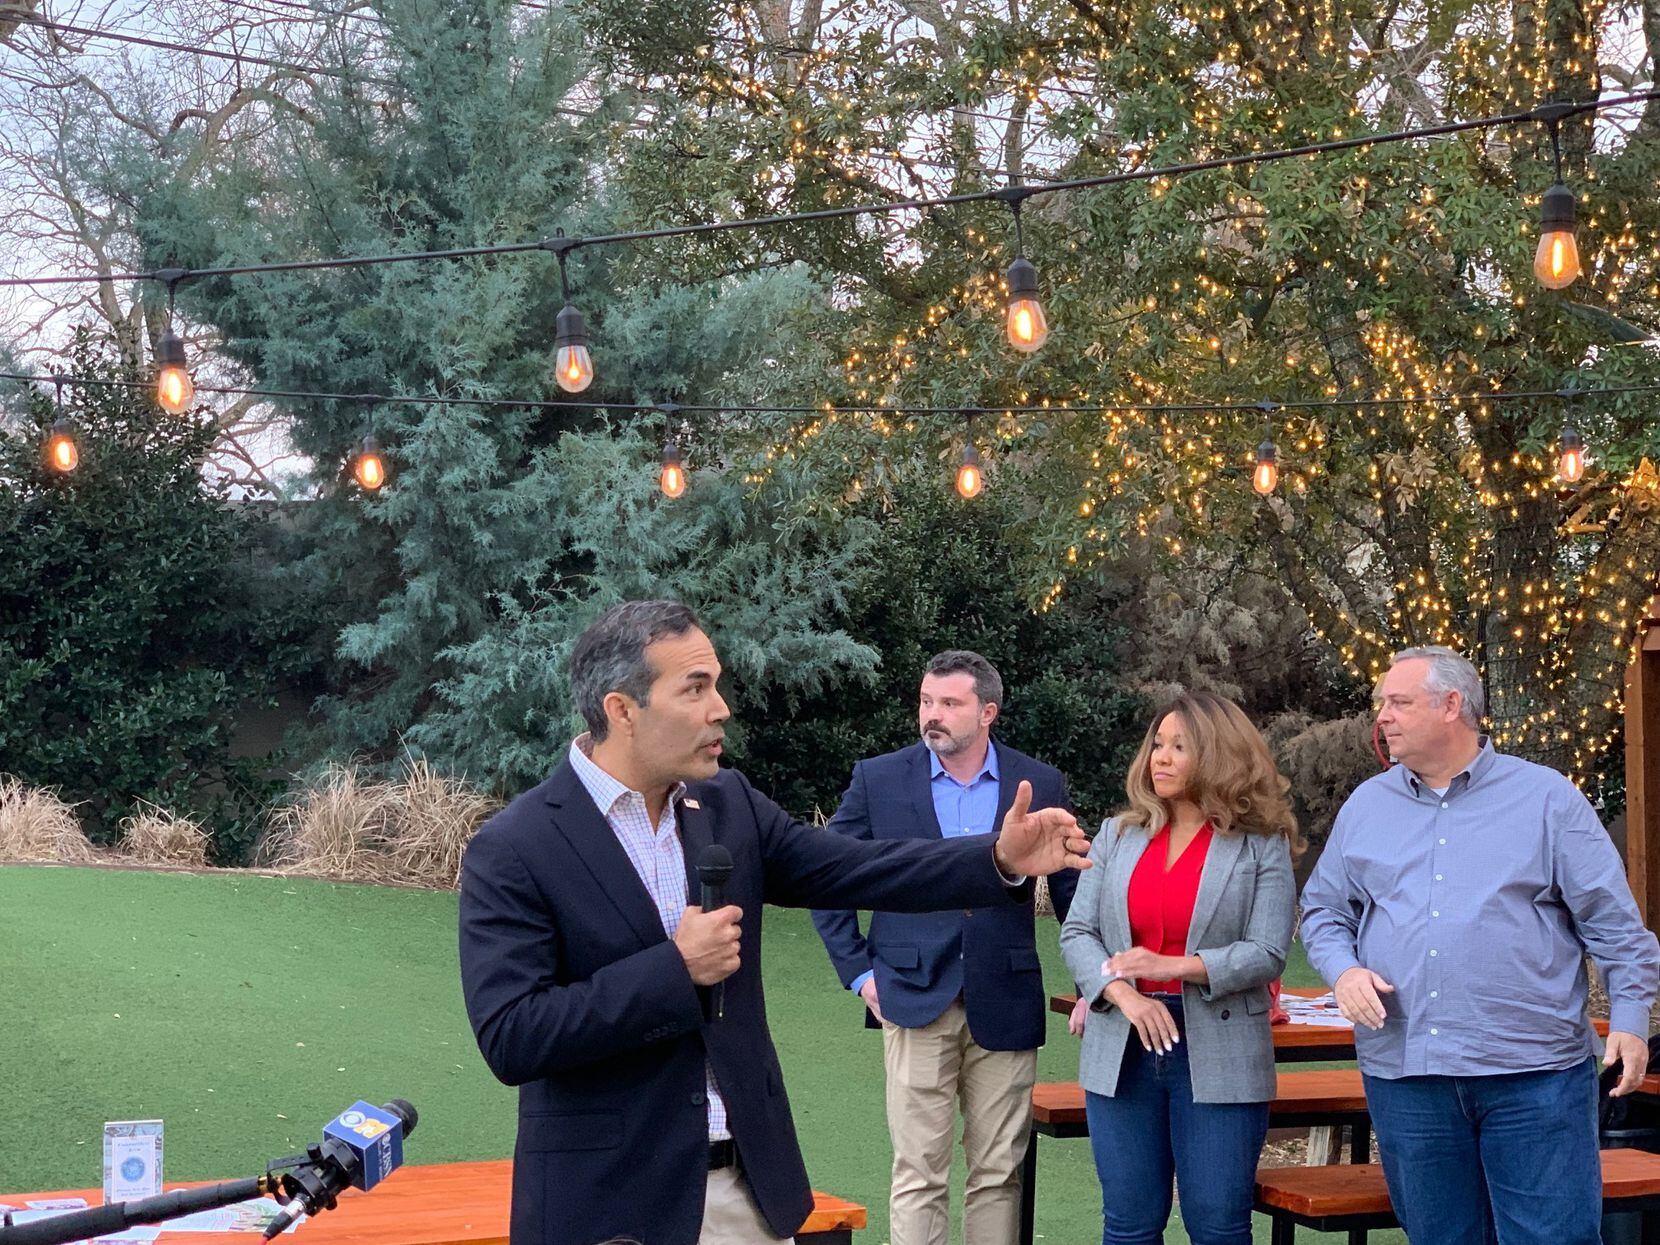 Texas Land Commissioner George P. Bush campaigns at Smoky Rose in Dallas.